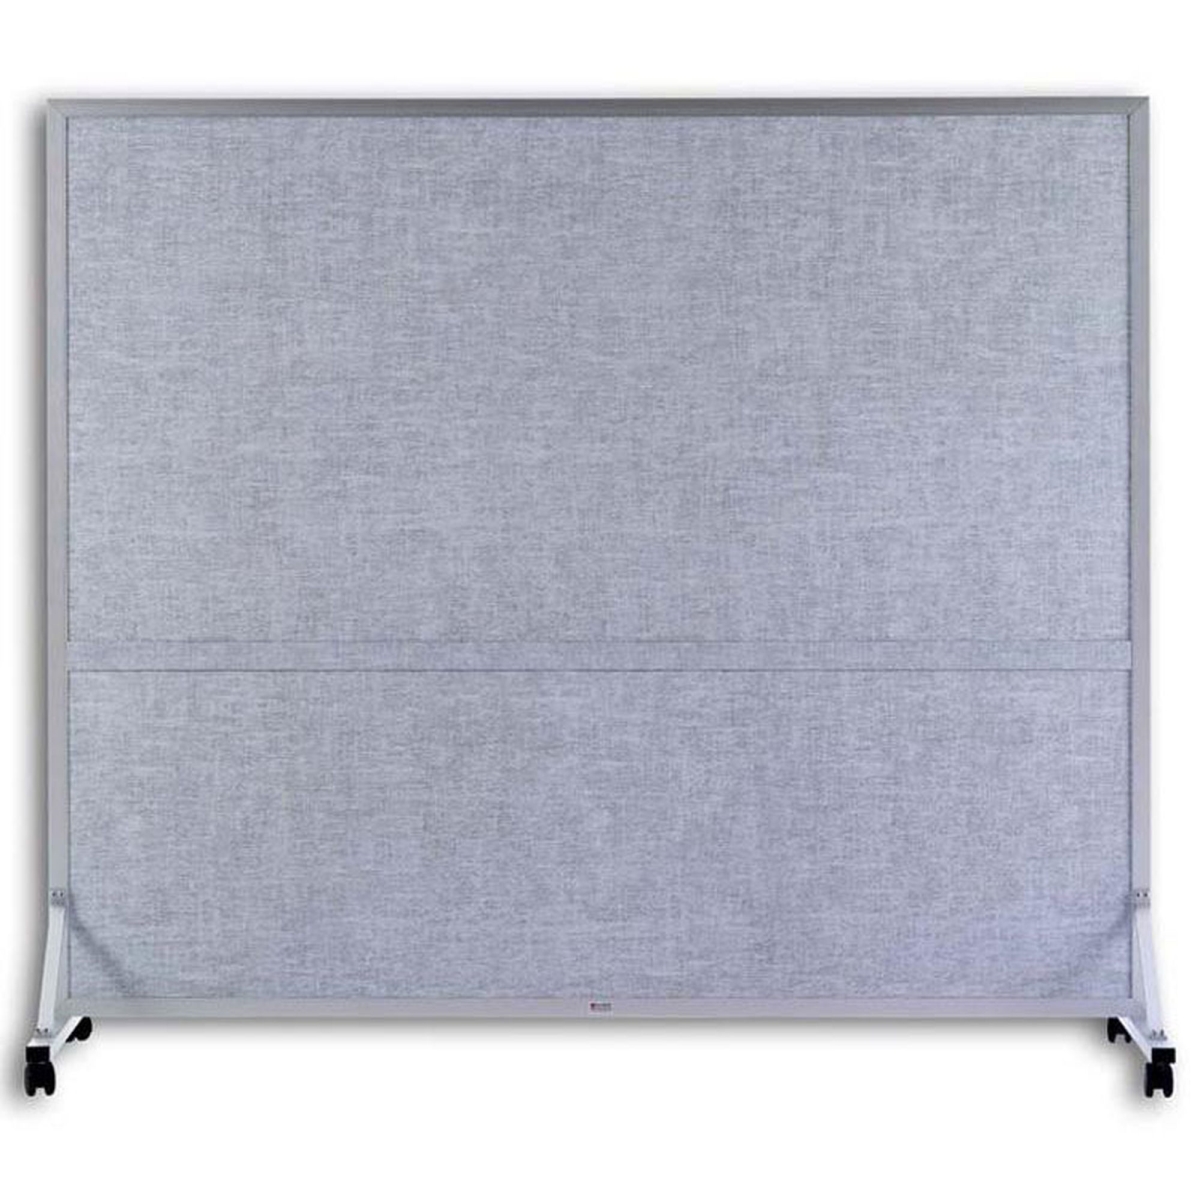 Bd7640002 76 X 48 In. Vinyl Double Duty Space Divider, Cotton